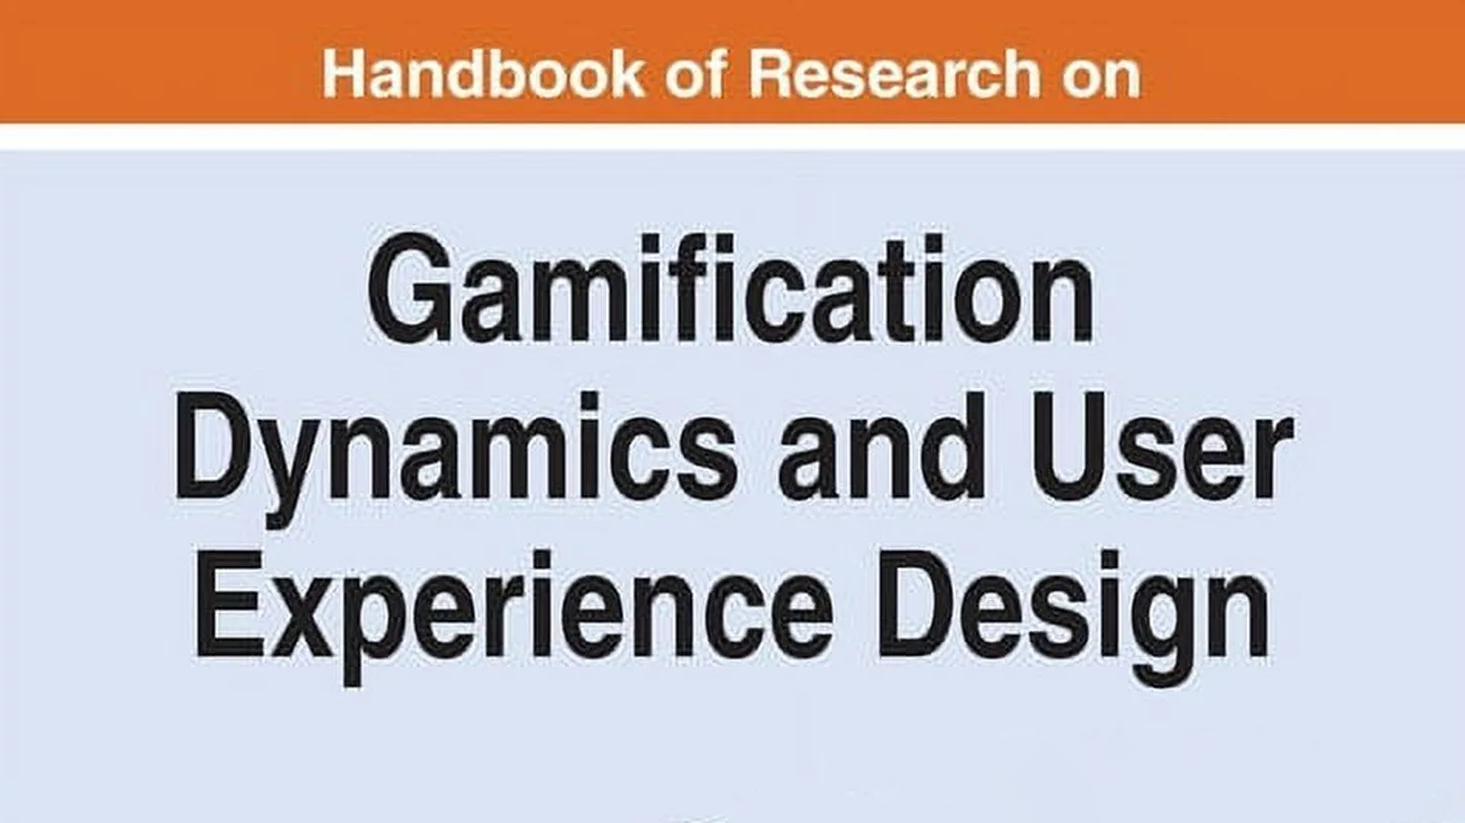 Senior Research Scientists Co-Author Chapter on Gamification